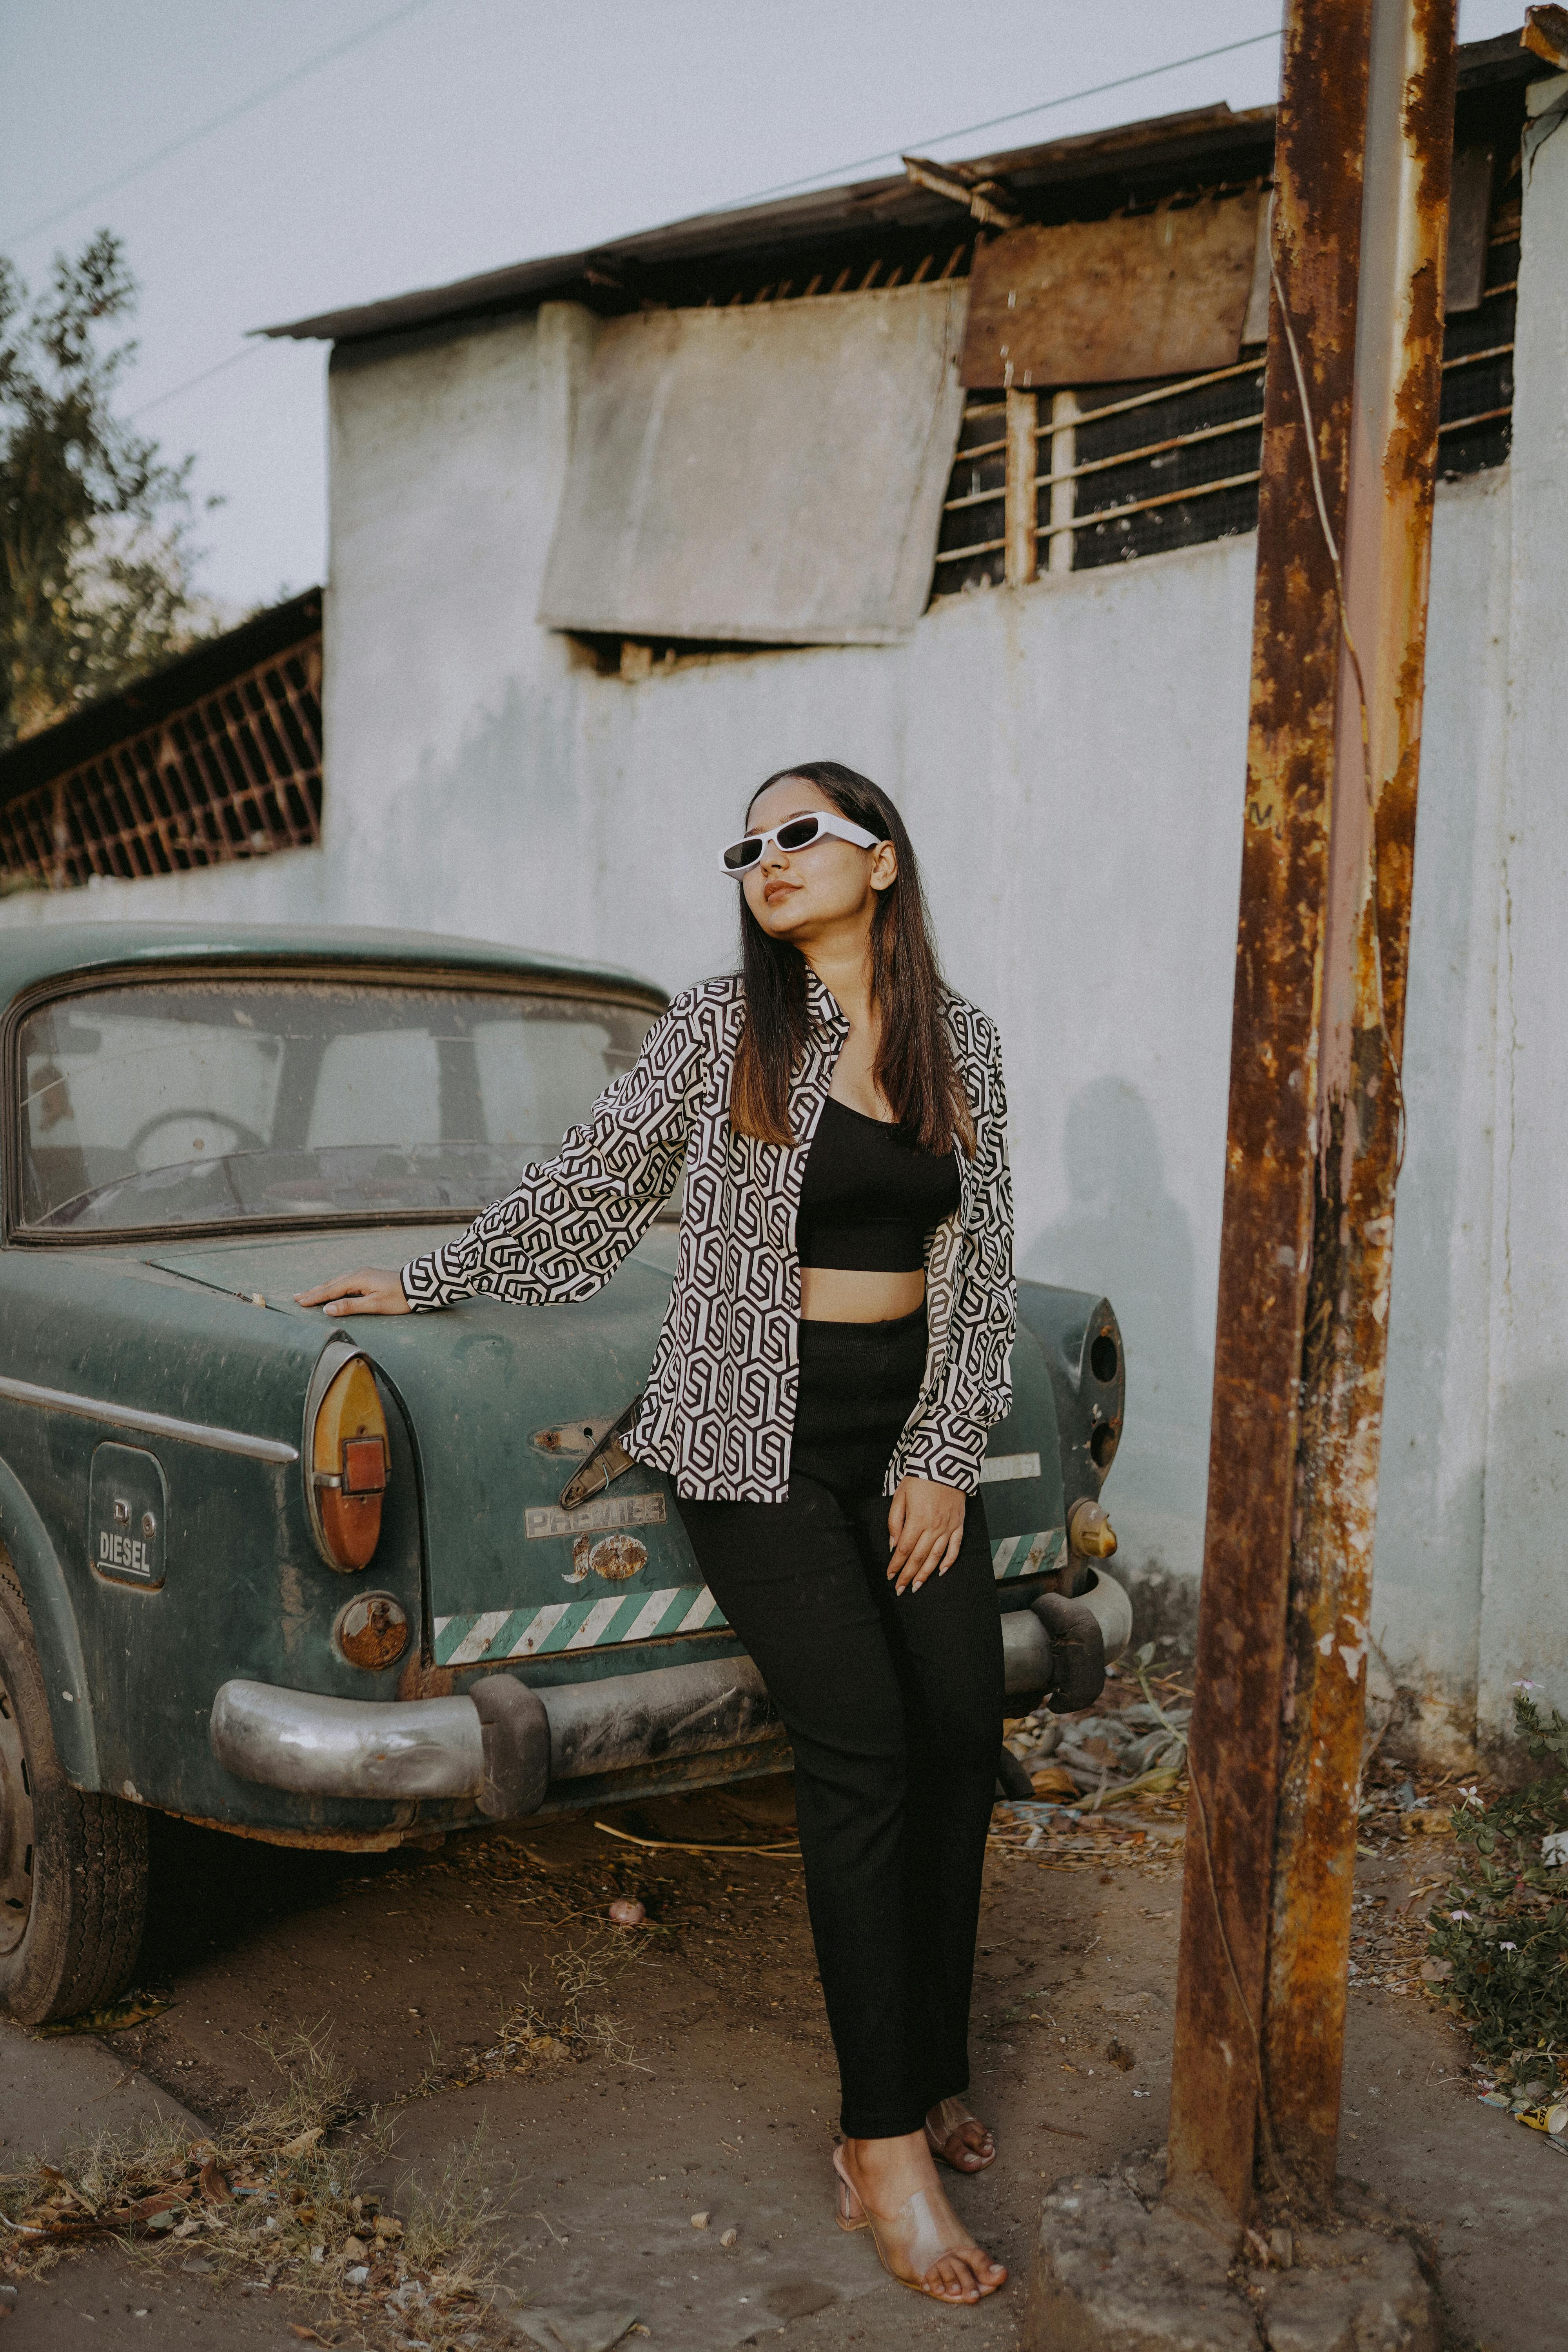 Free: Selective Focus Photo of Woman in Blue Denim Jacket, White Top, and  Black Bottoms Posing In Front of White Car With Her Eyes Closed - nohat.cc